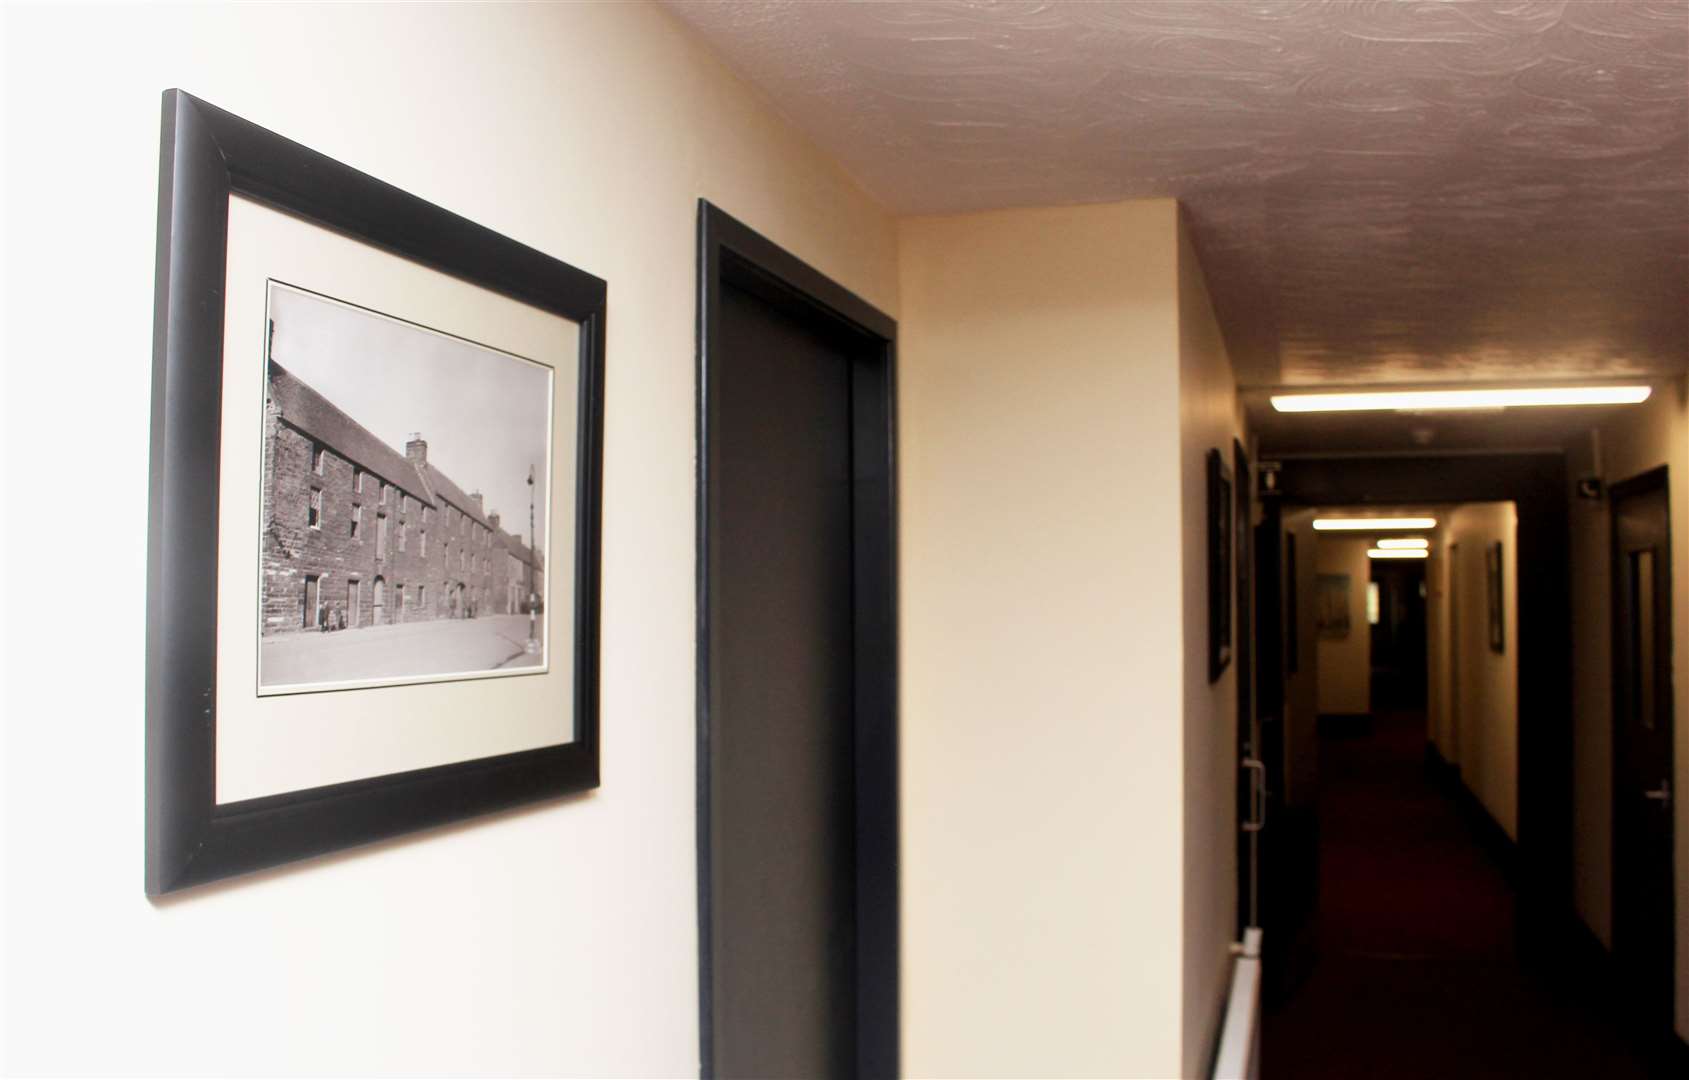 Framed prints from the Johnston photographic collection in a downstairs corridor. Picture: Alan Hendry